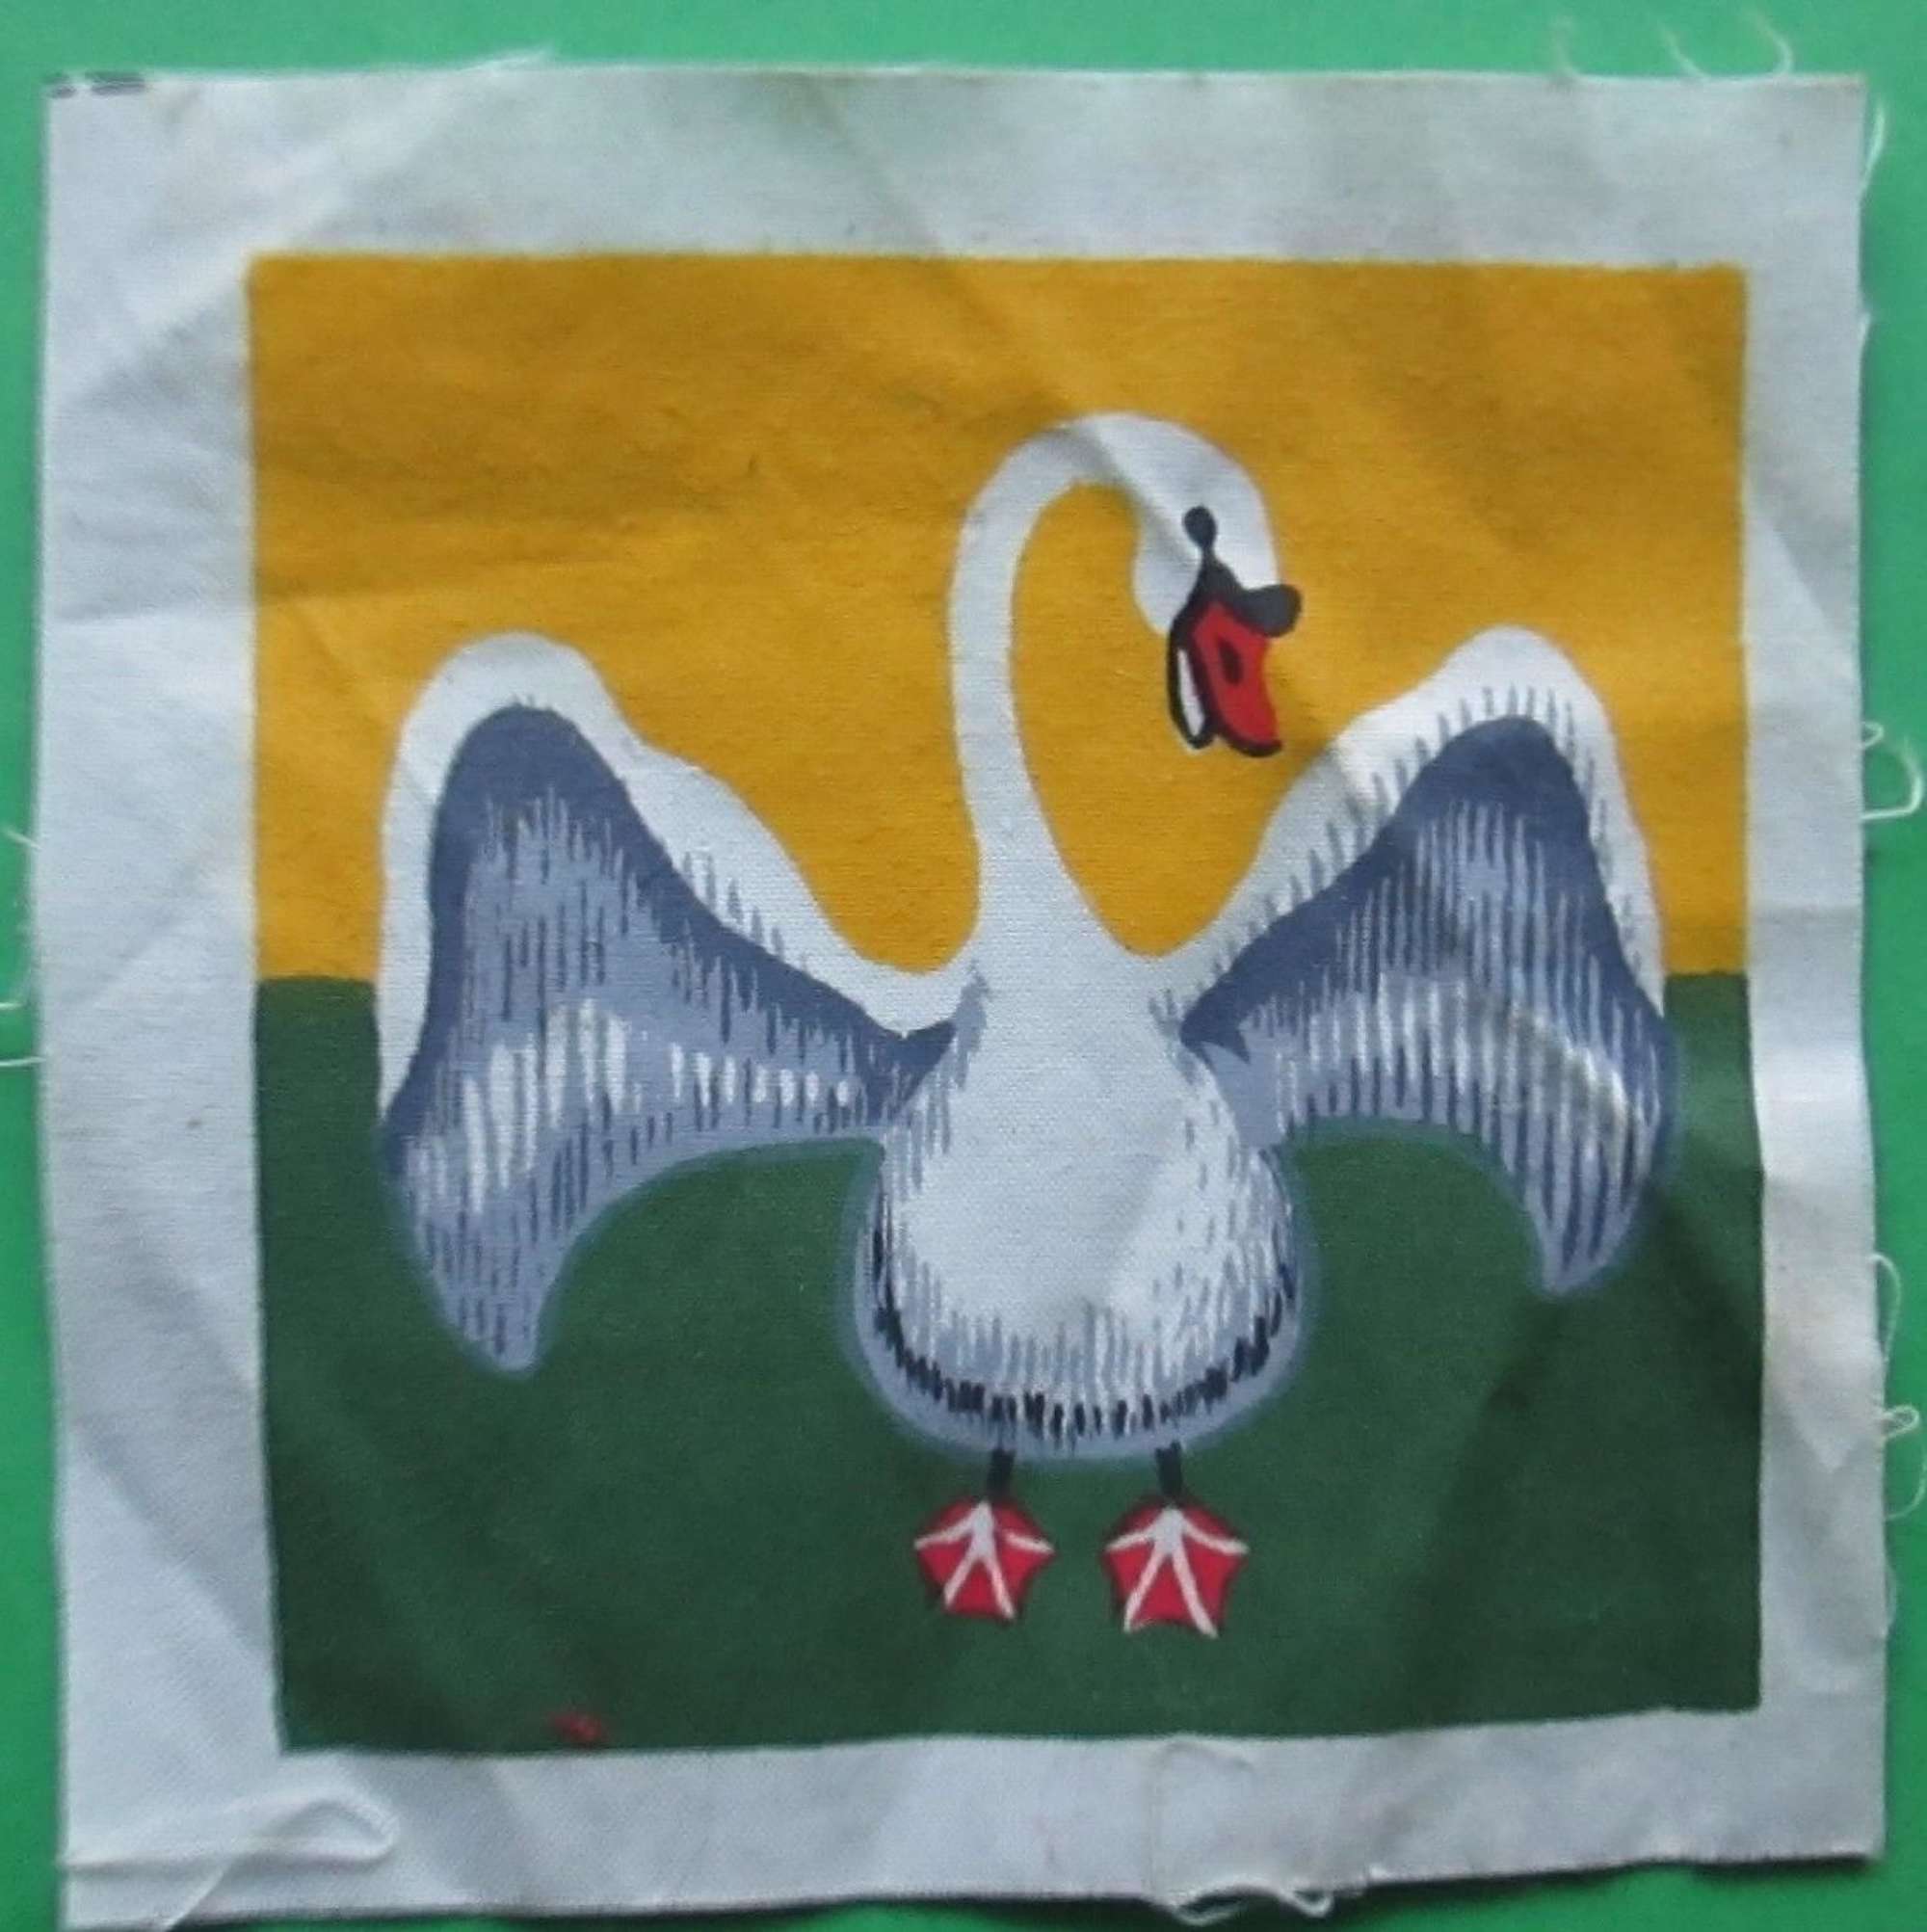 A WWII O FORCE JORDON FORMATION PATCH